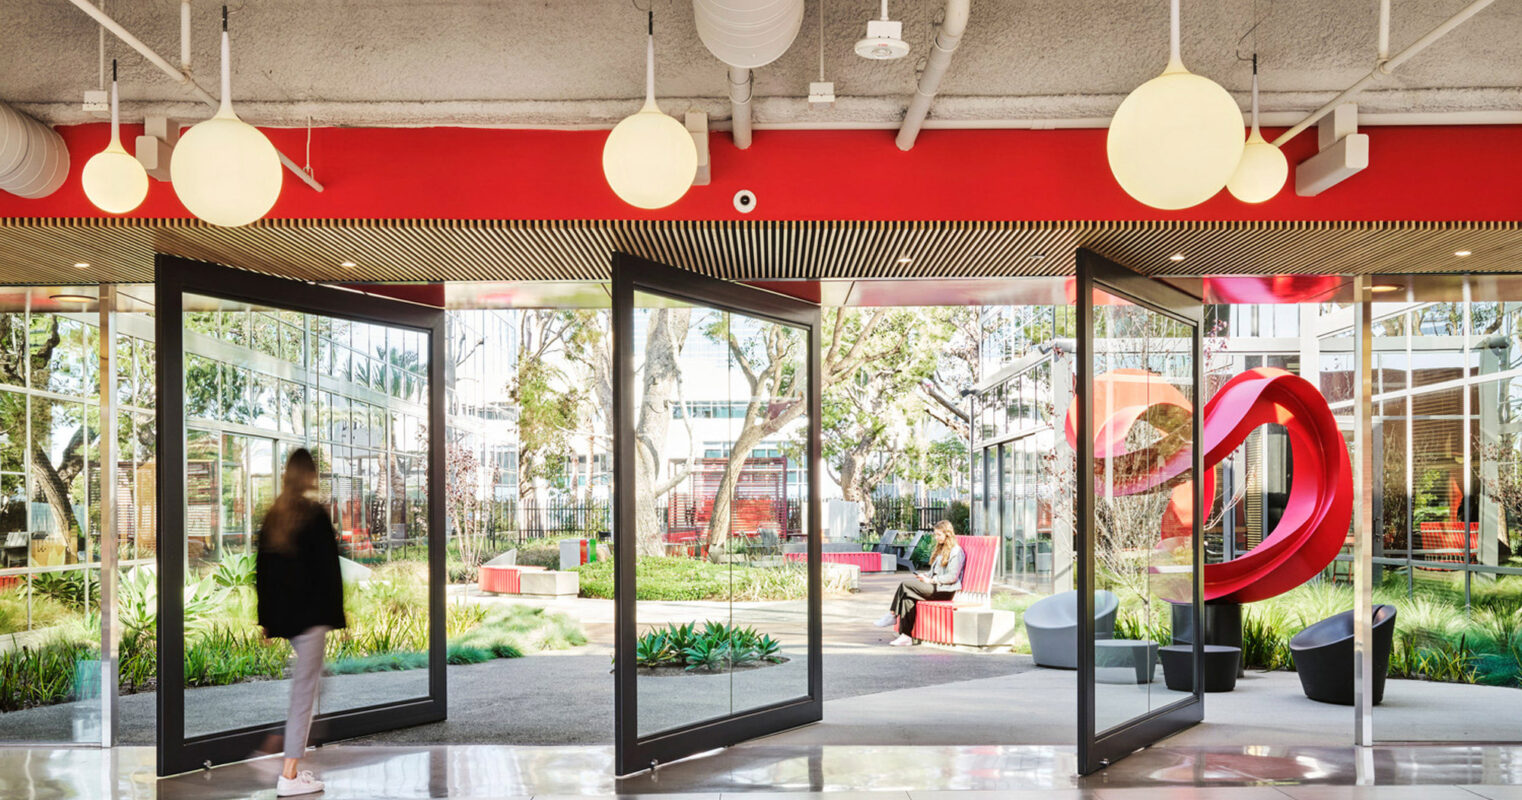 Modern office lobby with floor-to-ceiling windows offering a view of an outdoor green space, accented by a striking red entrance and abstract art installation, complemented by warm wooden slat ceilings and spherical pendant lighting.